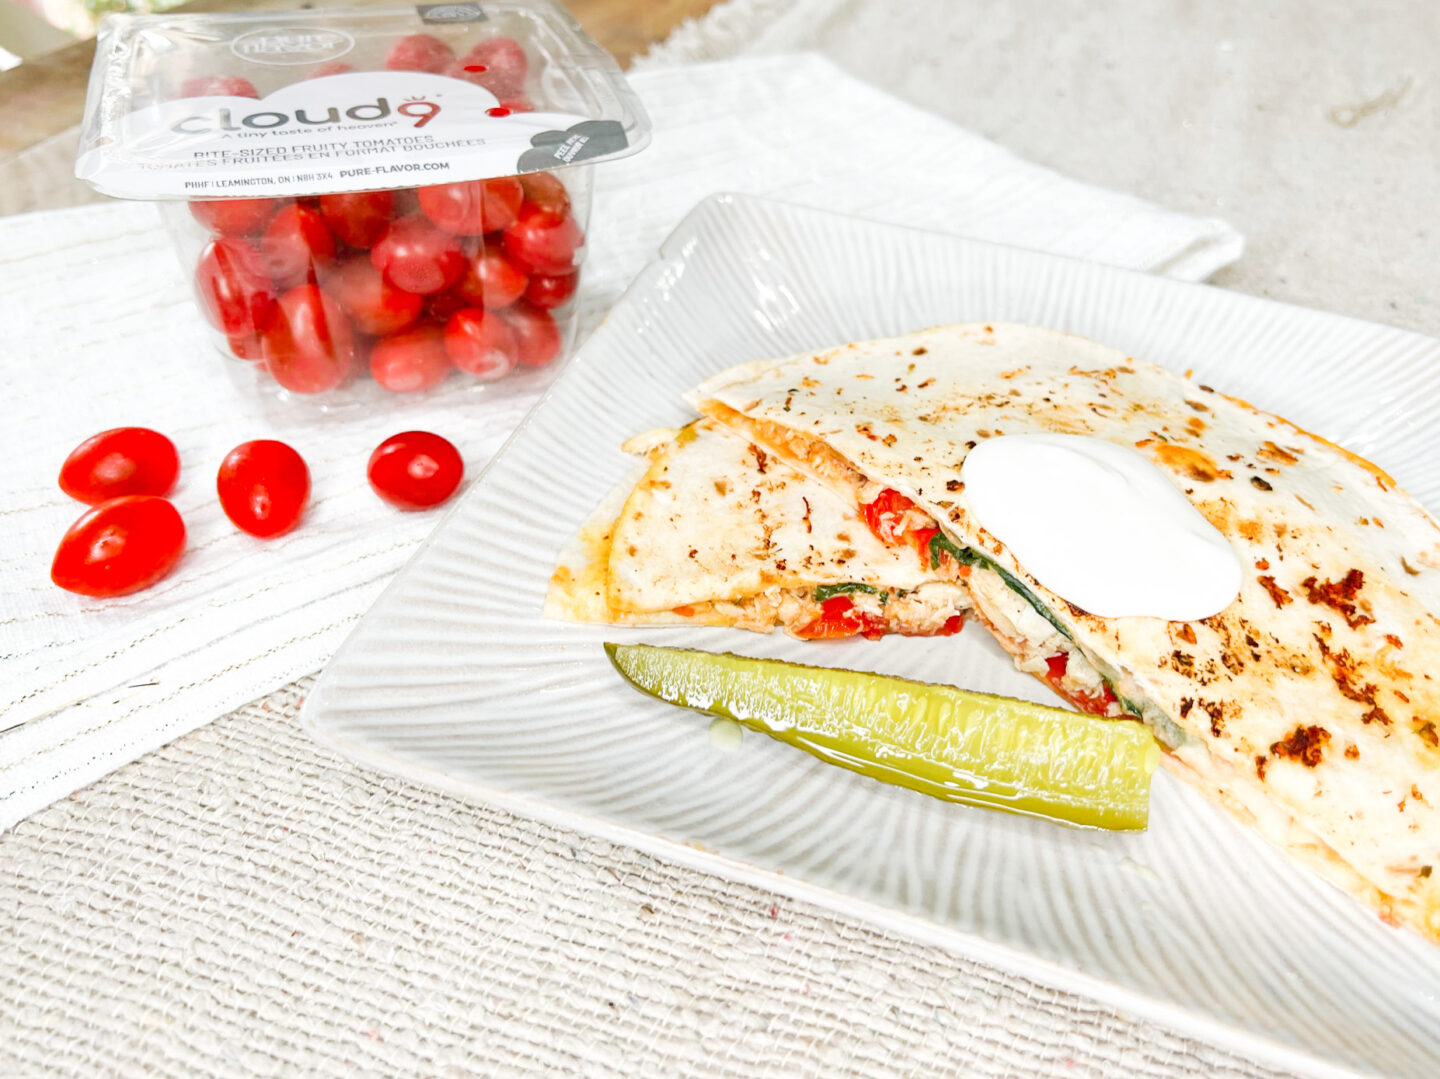 A low-carb tomato basil chicken wrap on a white plate with a pickle. A container of Cloud 9 grape tomatoes is in the background. 